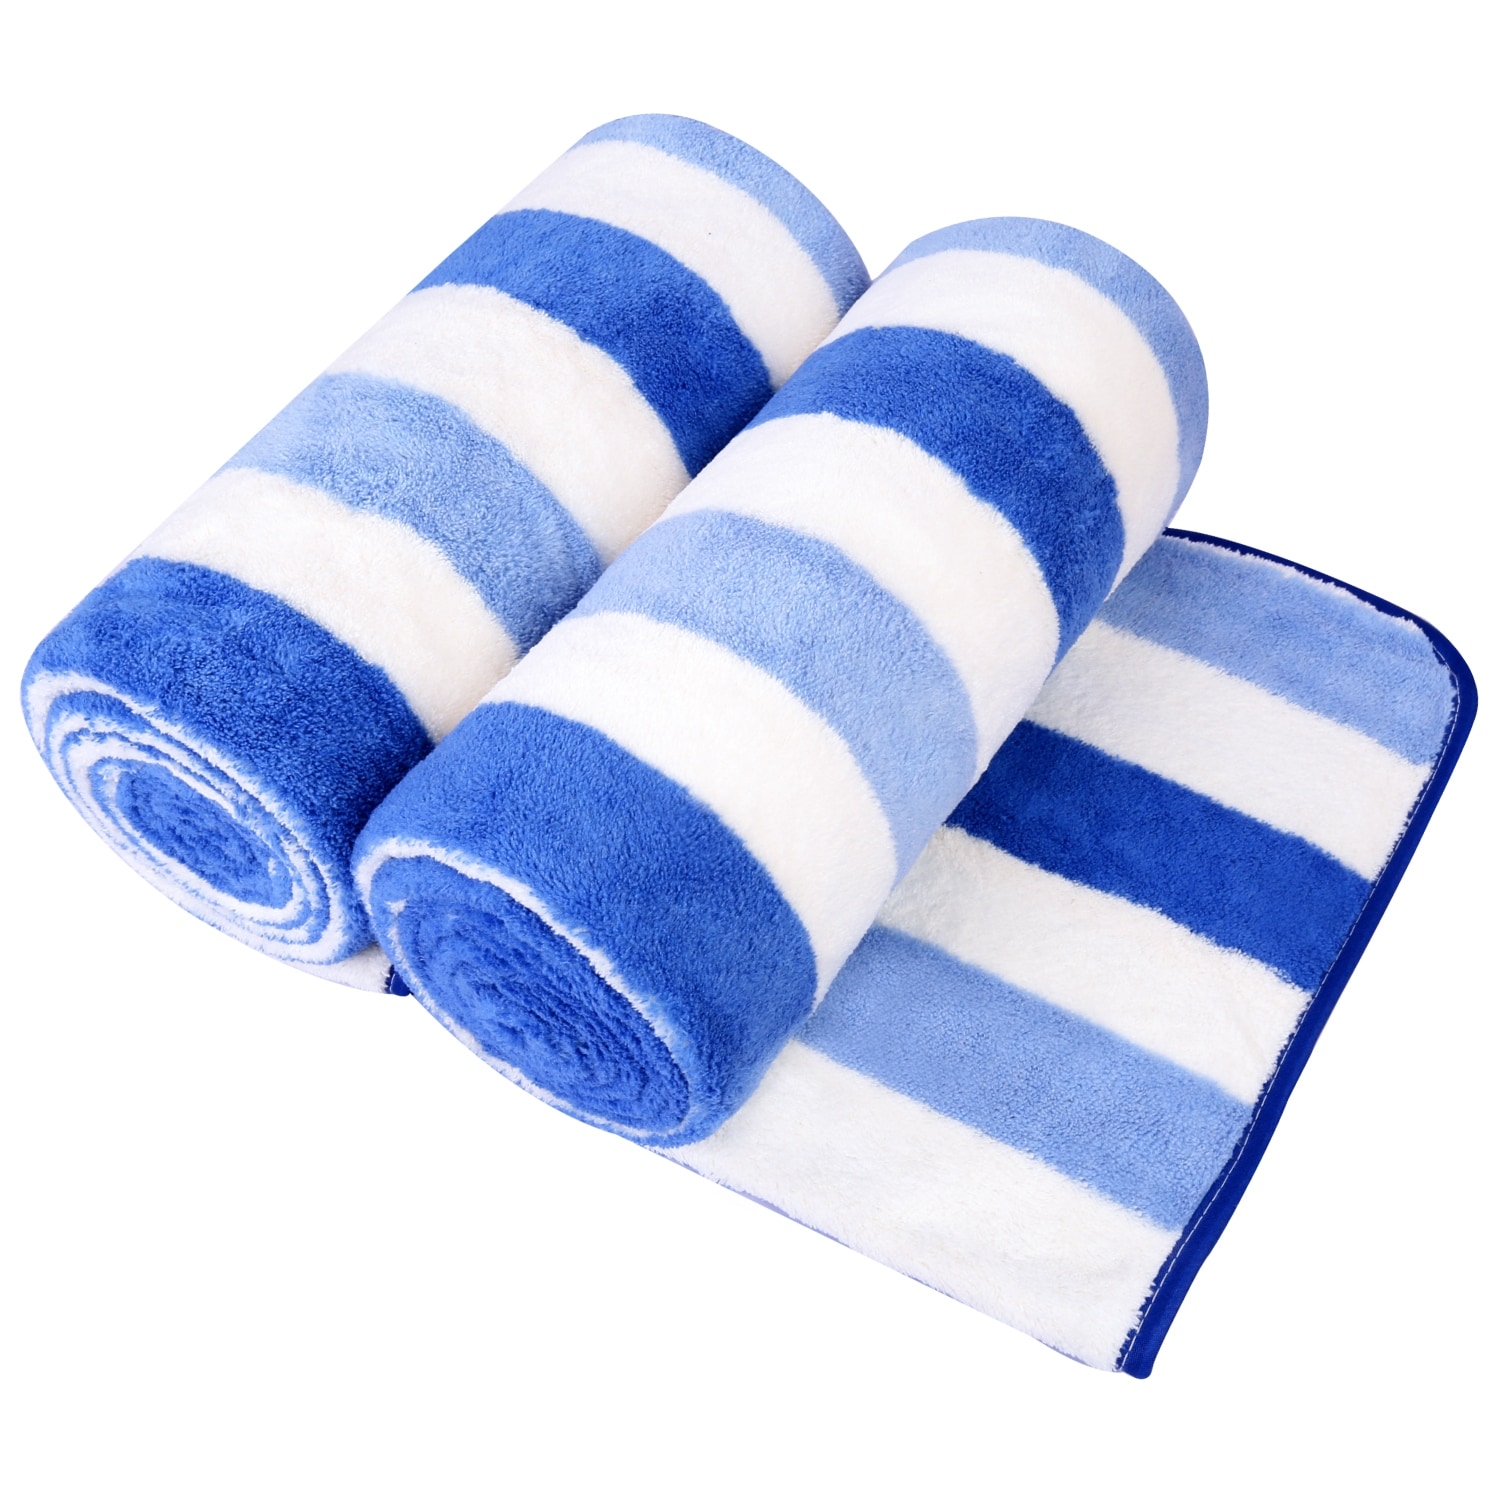 https://ak1.ostkcdn.com/images/products/is/images/direct/f888b6db7282778e51f849d5da1d0b89bf1b0b4d/2-Piece-Fleece-Cabana-Beach-Towel-Set-Absorbent-Pool-Towels.jpg